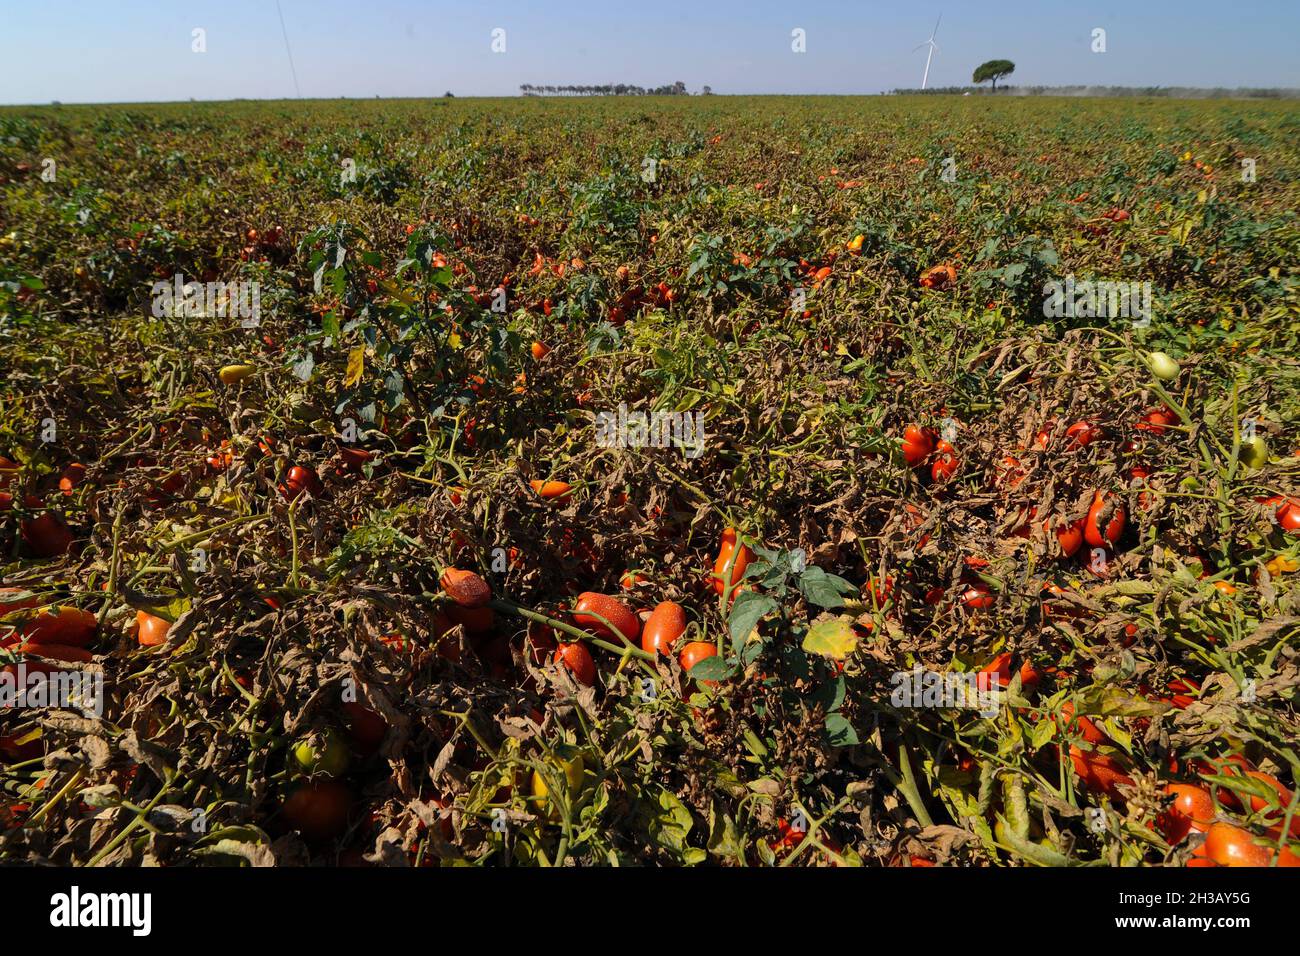 San Severo di Foggia, August, 30,2016 - Harvesting of tomatoes in the fields of the Tavoliere delle Puglie - Italy - Photo by Nicola Ianuale Stock Photo